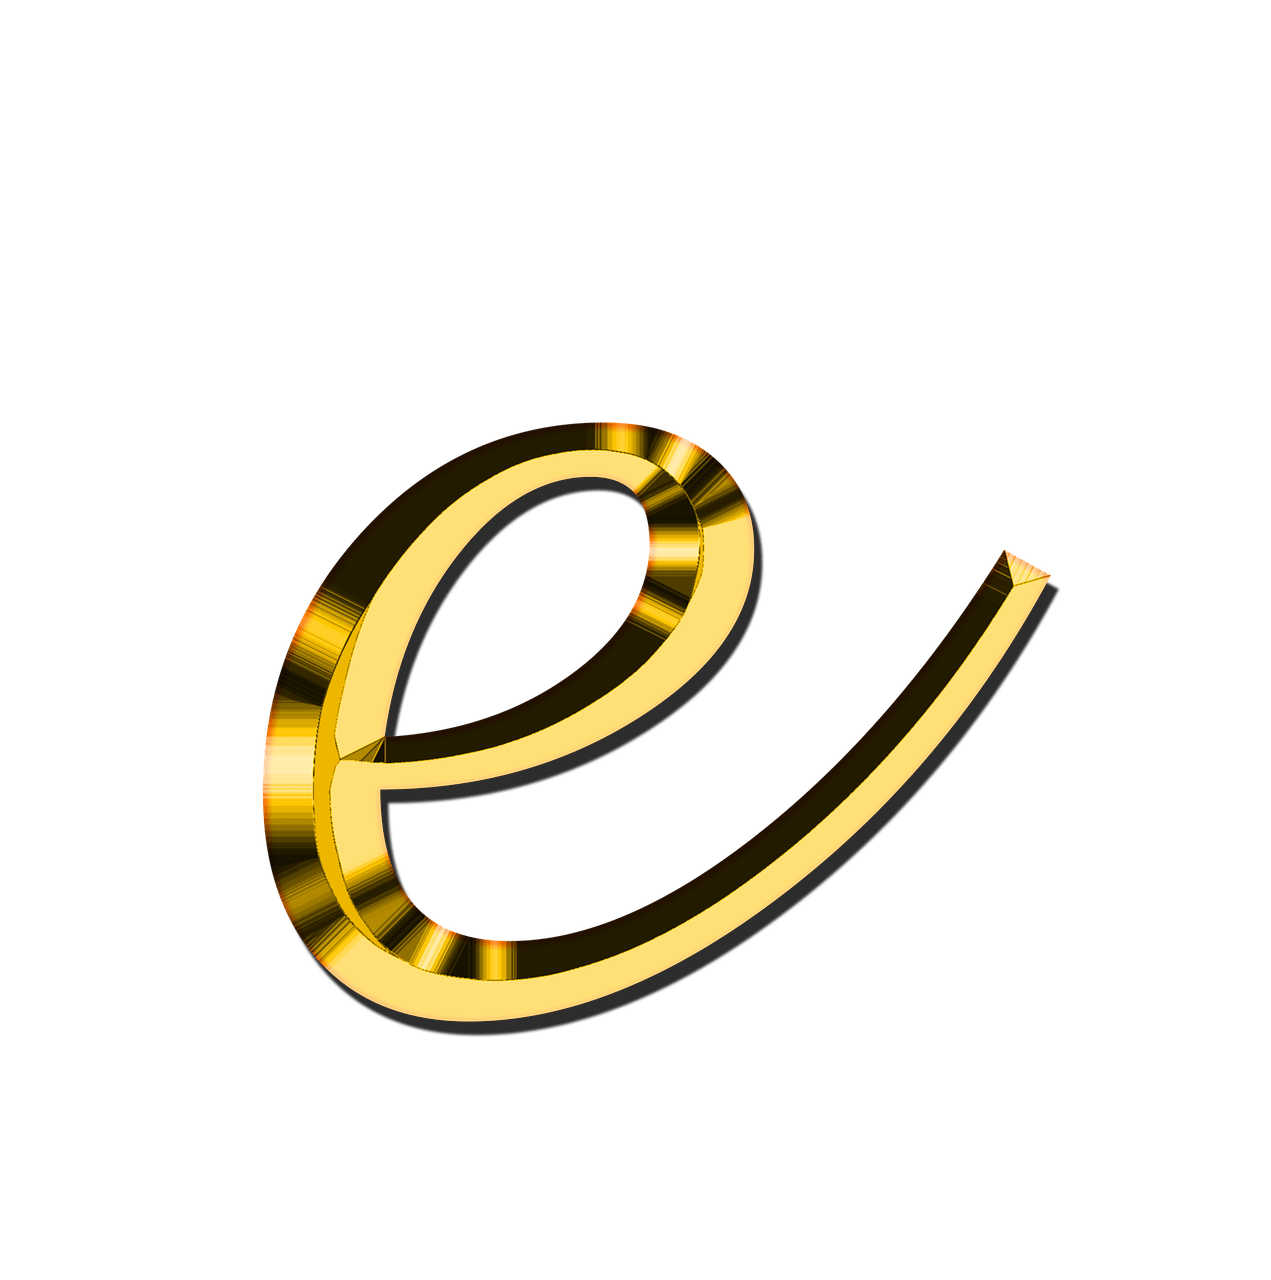 All Photo Png Clipart Clip Art Of Letter E Transparent Png Full Images